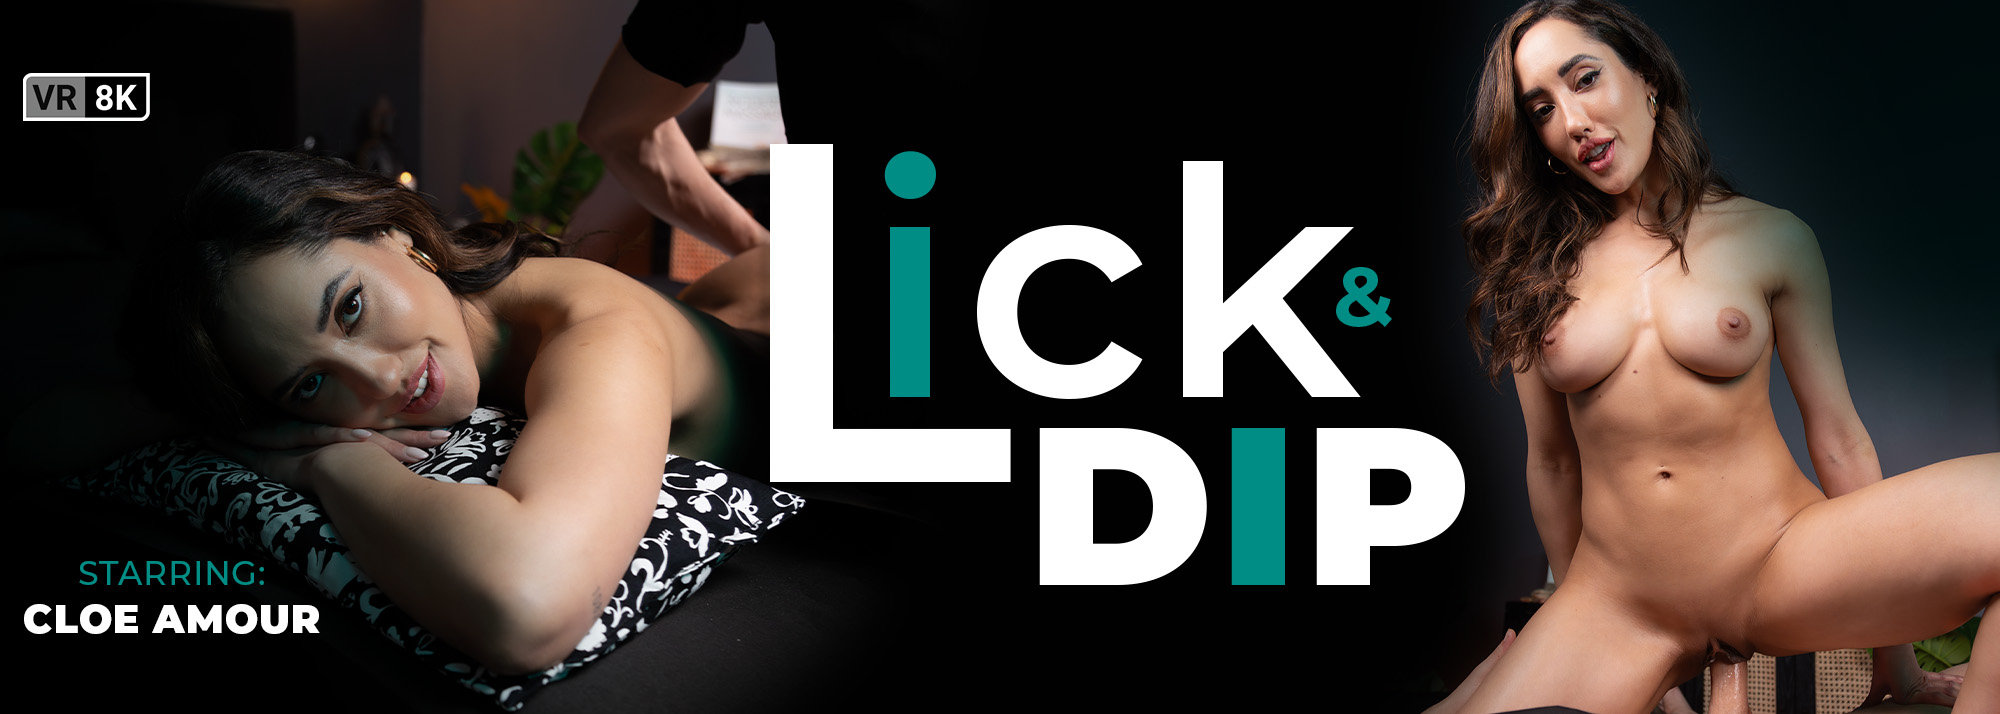 Lick And Dip VR Porn Video: 8K, 4K, Full HD and 180/360 POV |  Slideshow